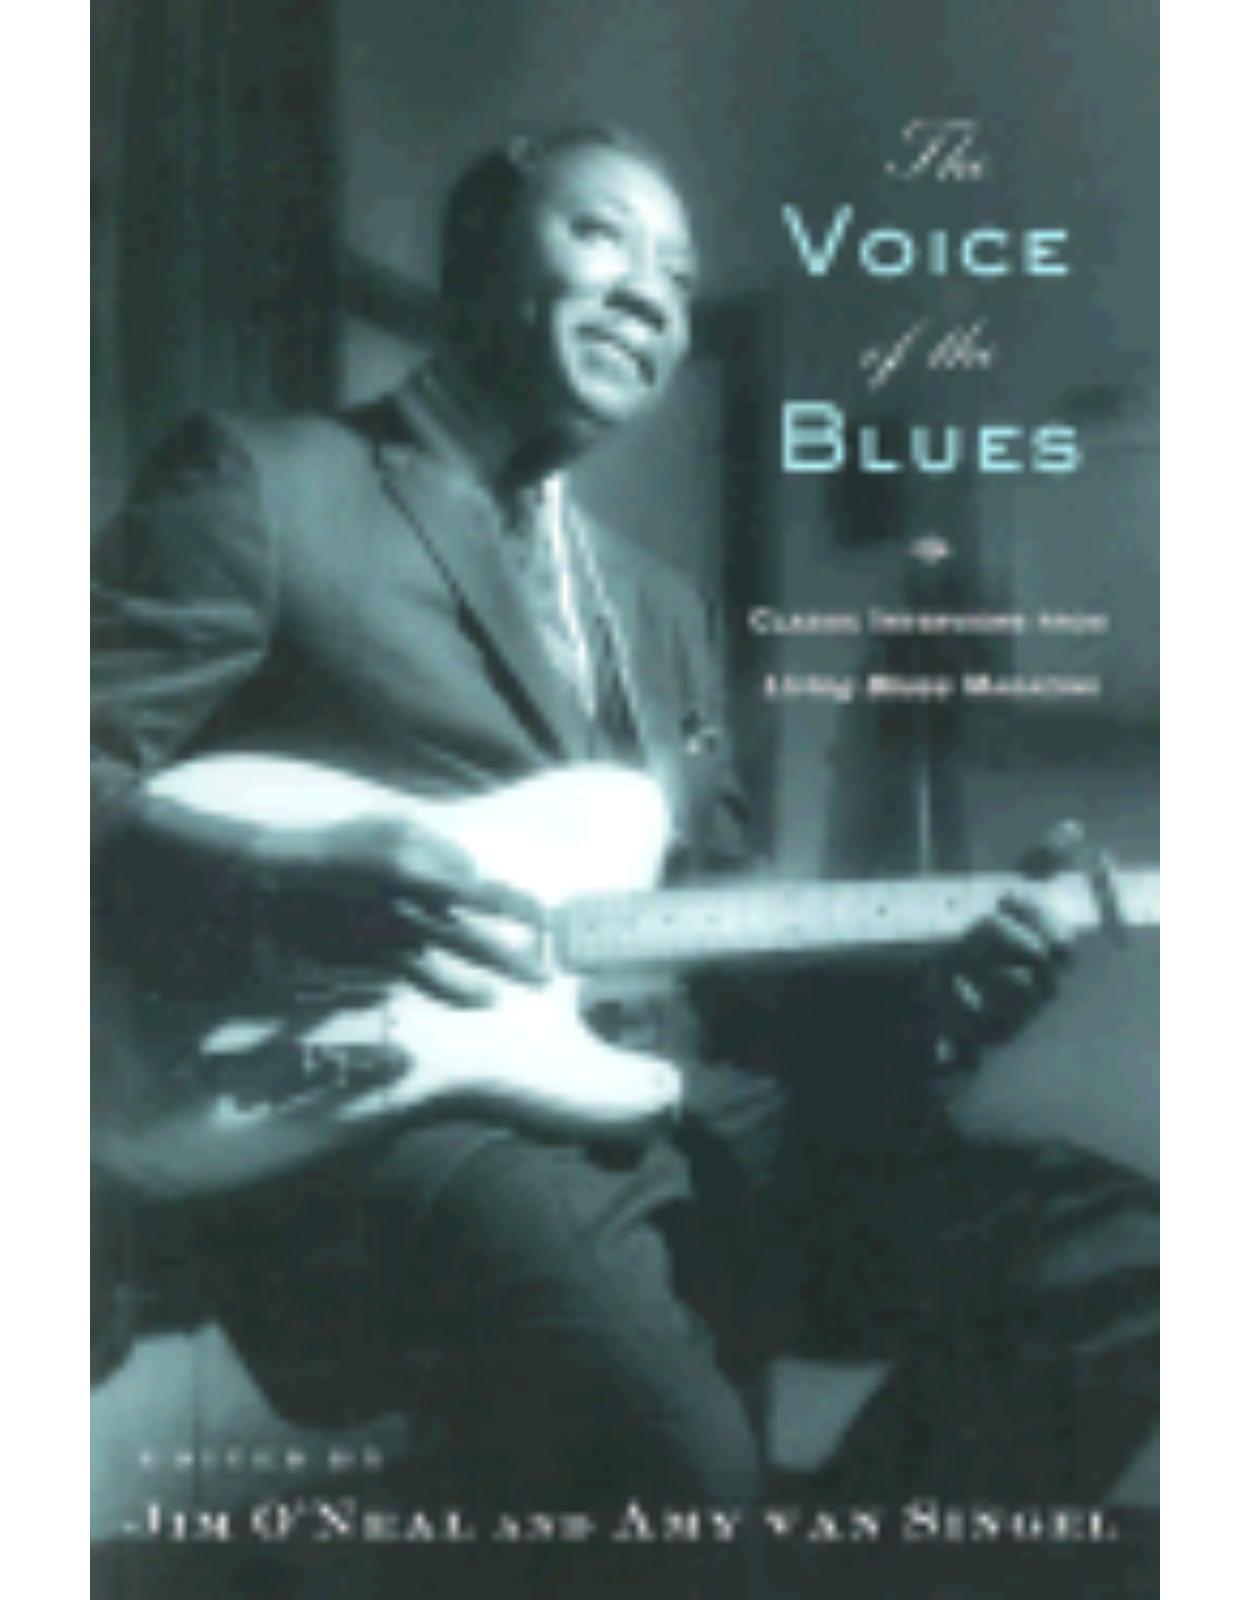 The Voice of the Blues: Classic Interviews from 